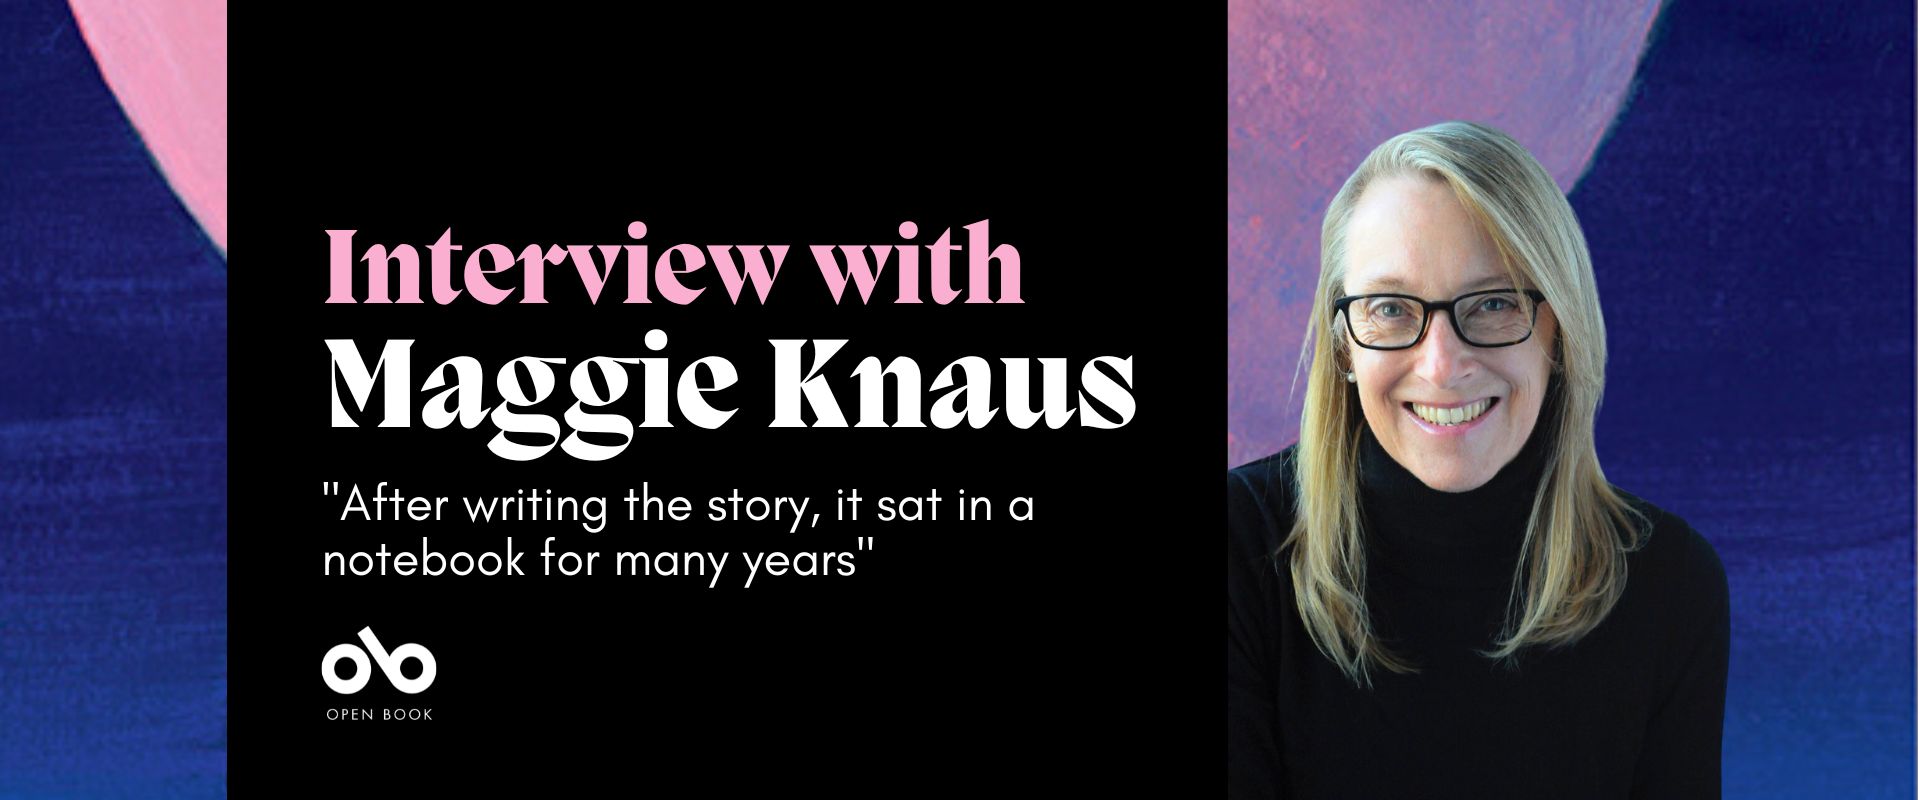 purple, blue, pink, and black banner image with photo of book creator Maggie Knaus and text reading "Interview with Maggie Knaus After writing the story, it sat in a notebook for many years". Open Book logo bottom left